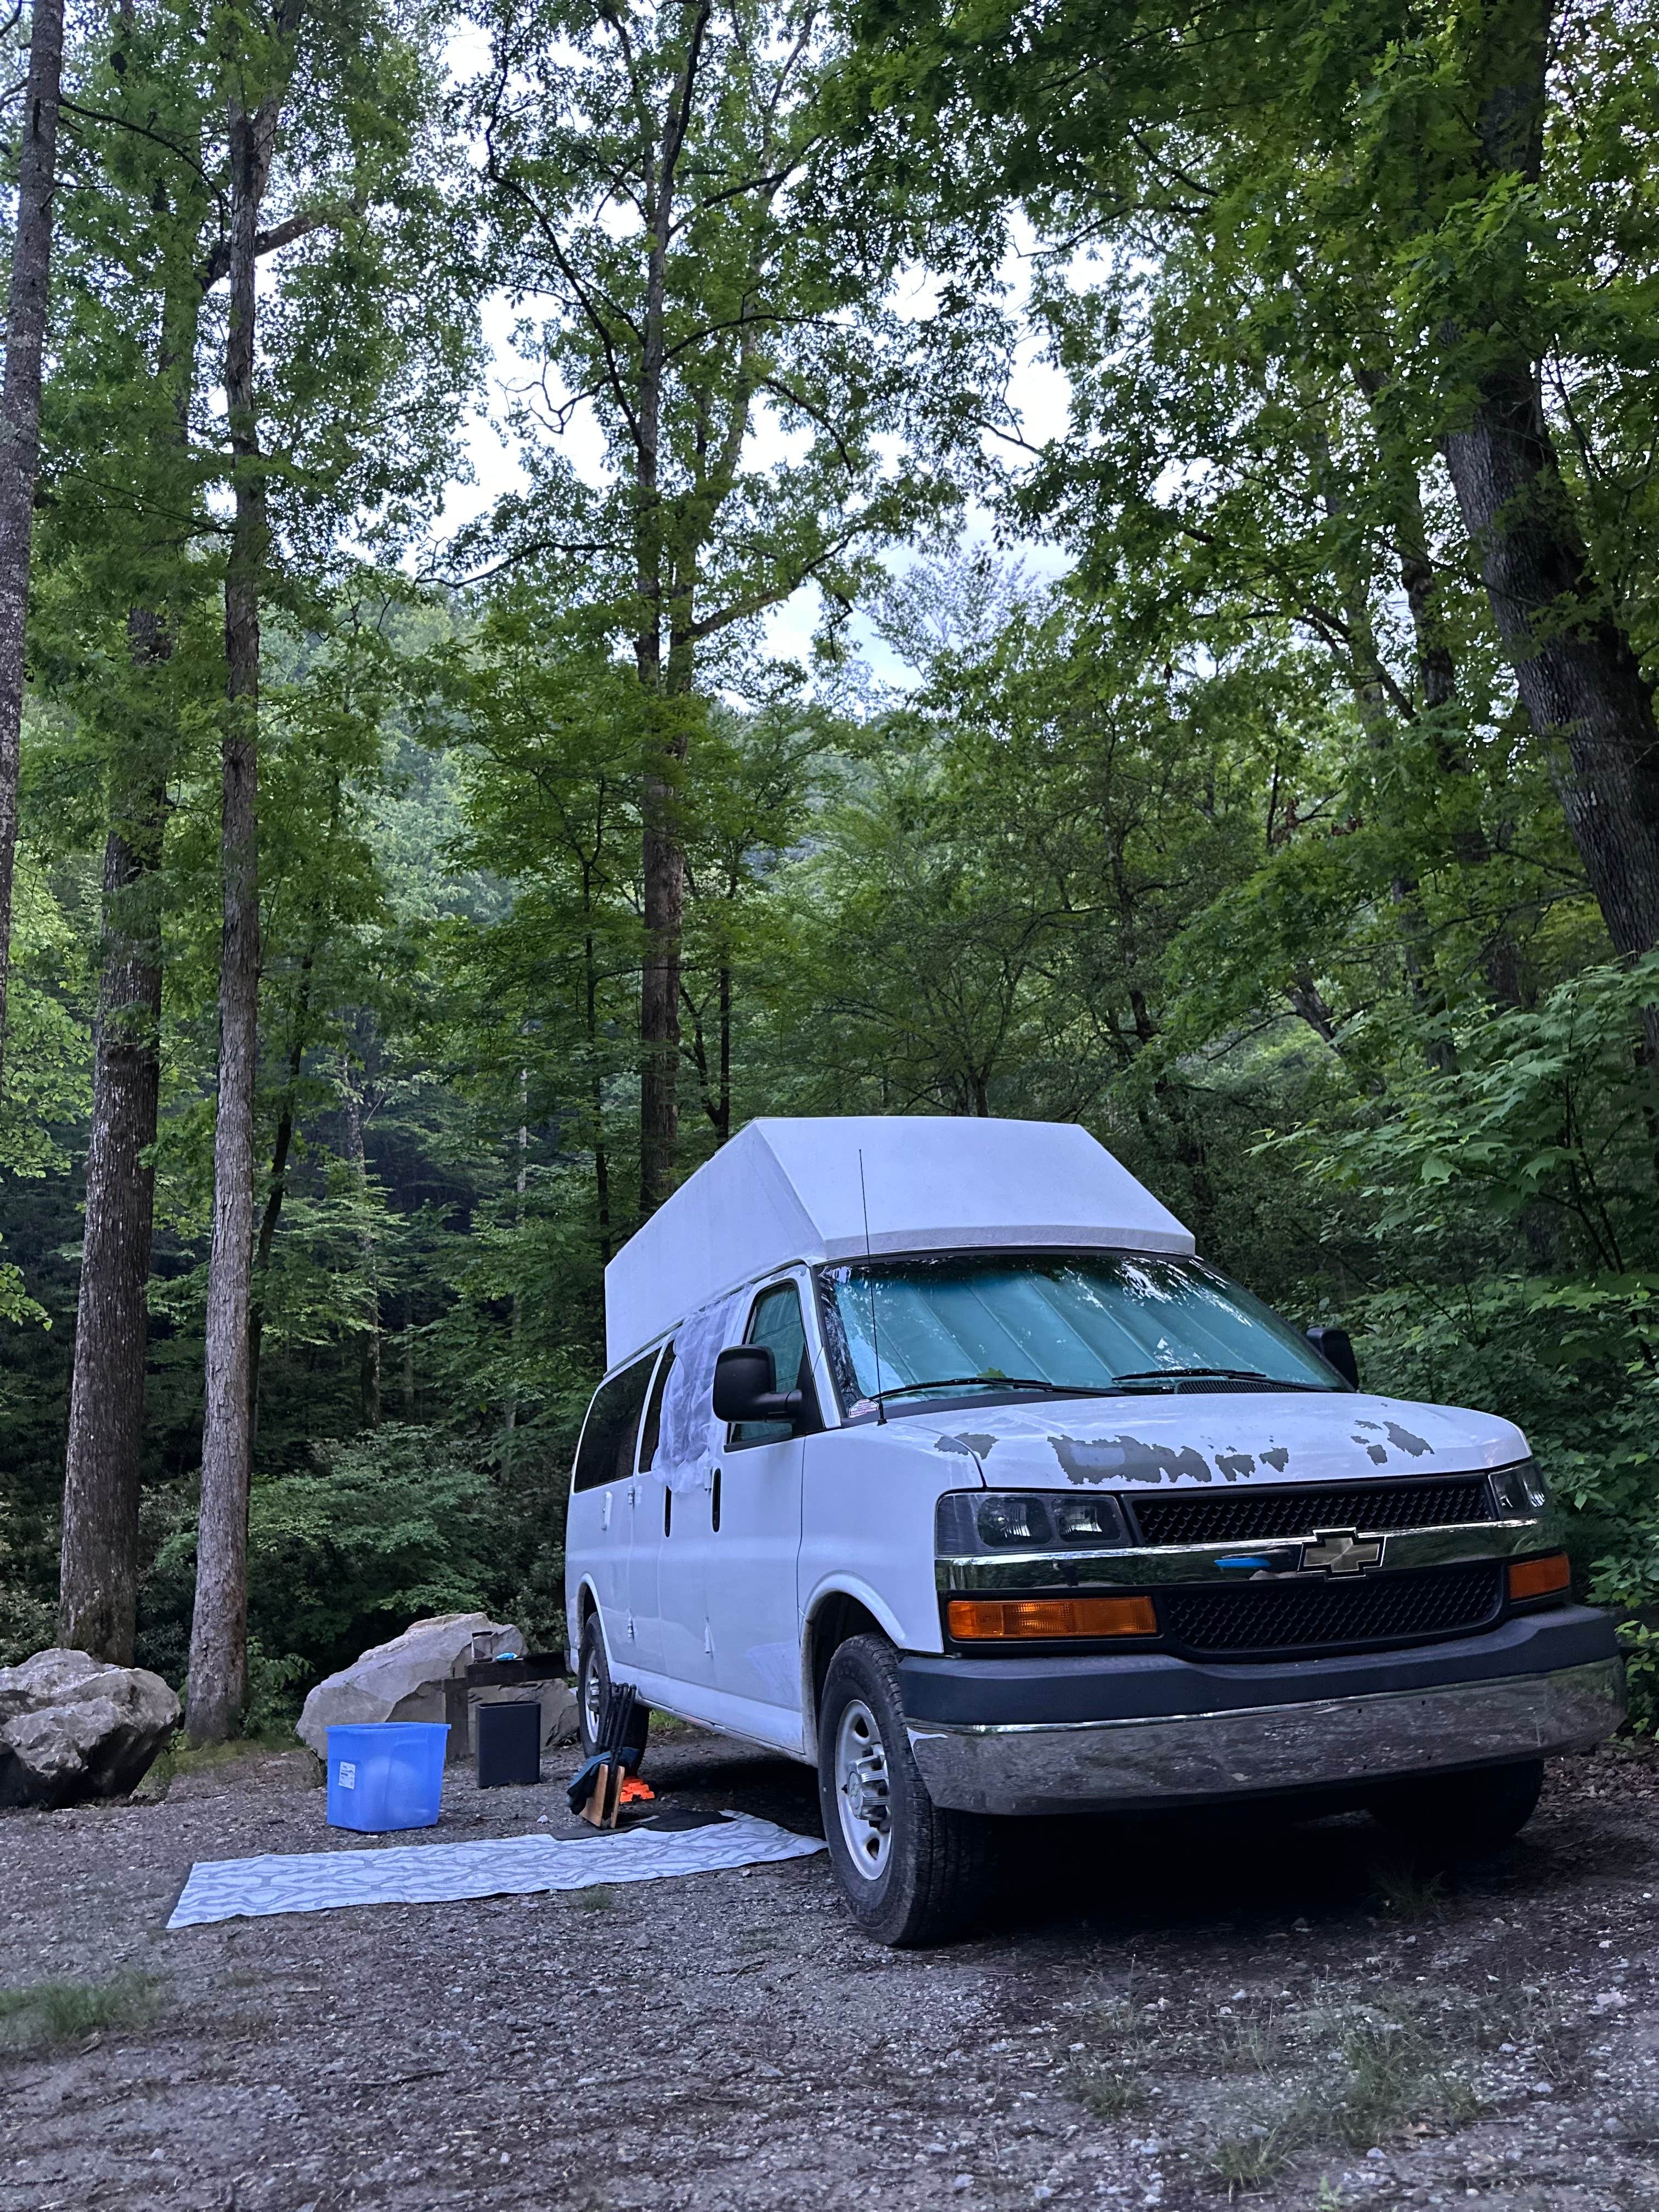 Camper submitted image from National Forest Road/Steele Creek/Nates Place Dispersed Campsite - 4